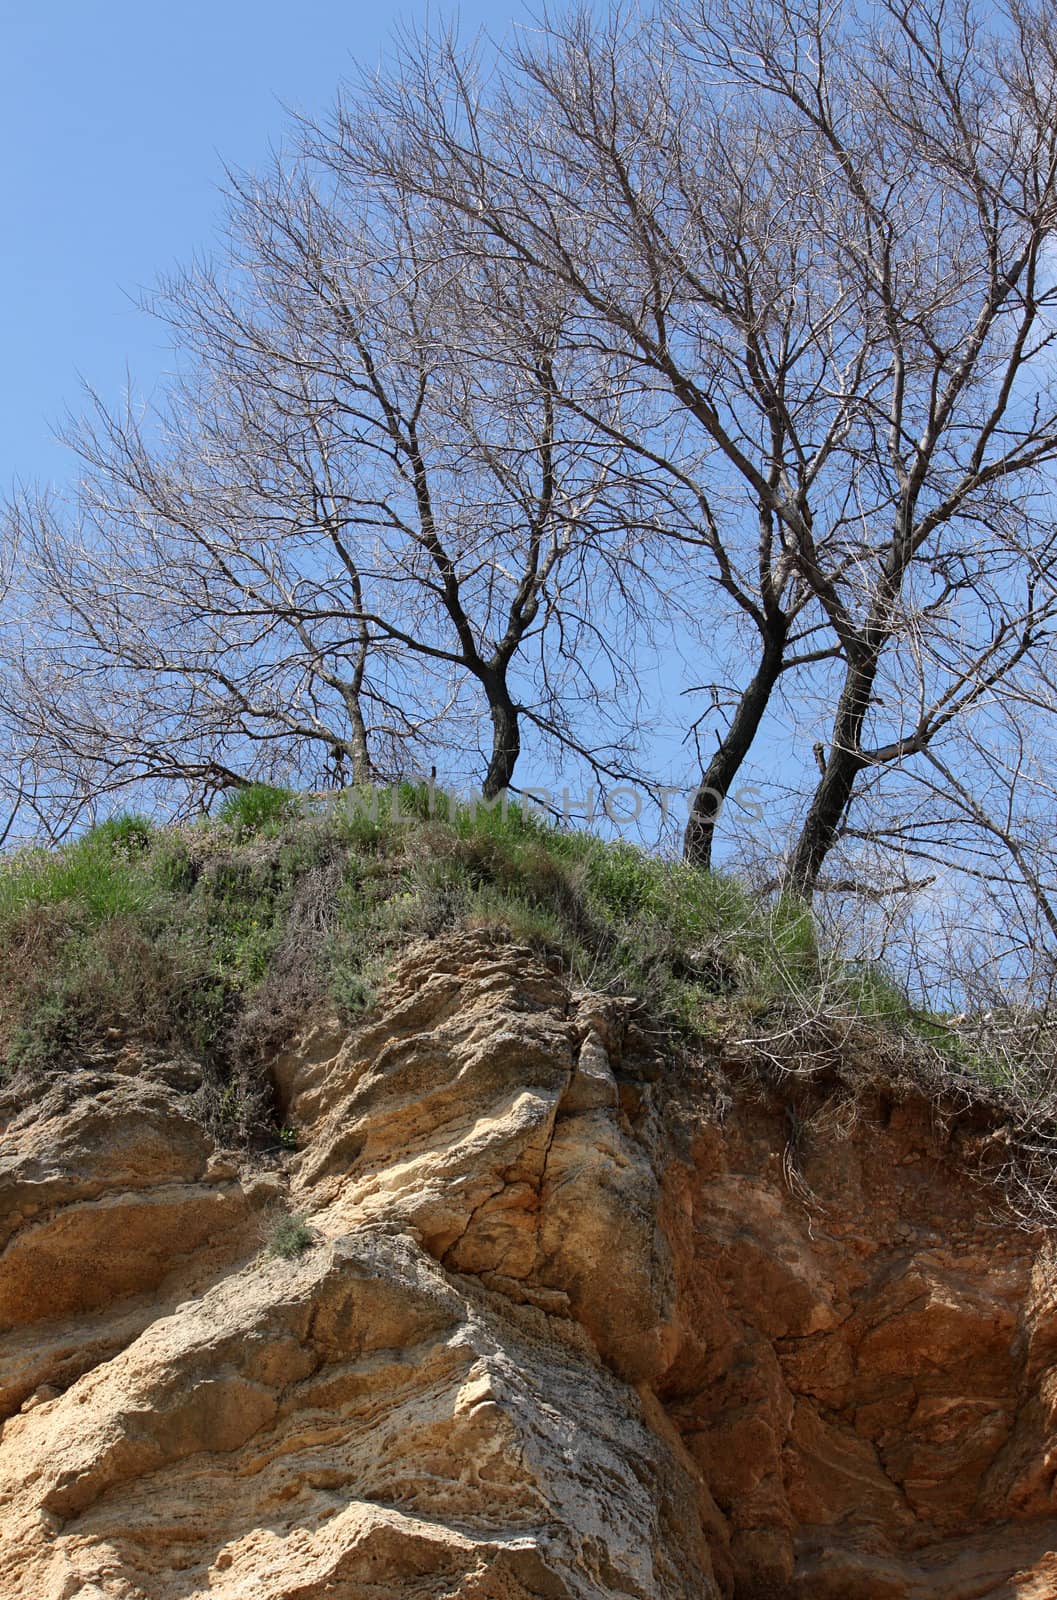 trees growing on precipice over blue sky